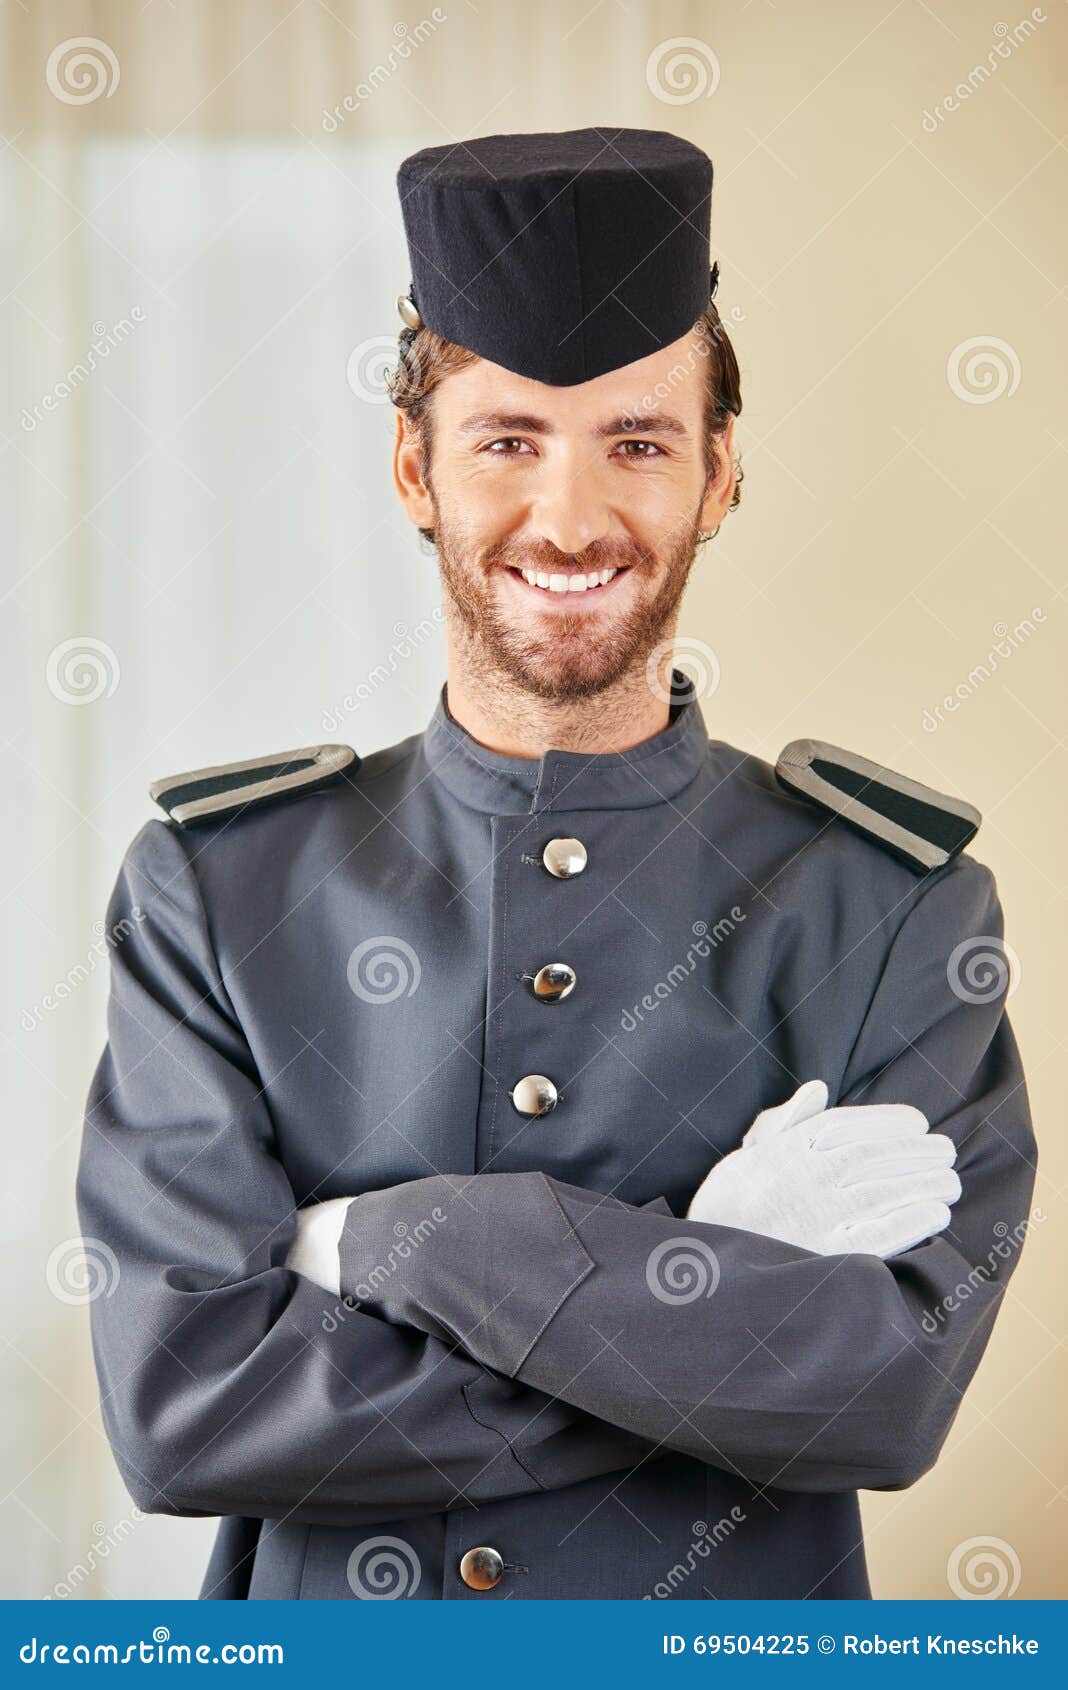 Friendly Hotel Page Smiling Stock Image - Image of reception, kindness ...